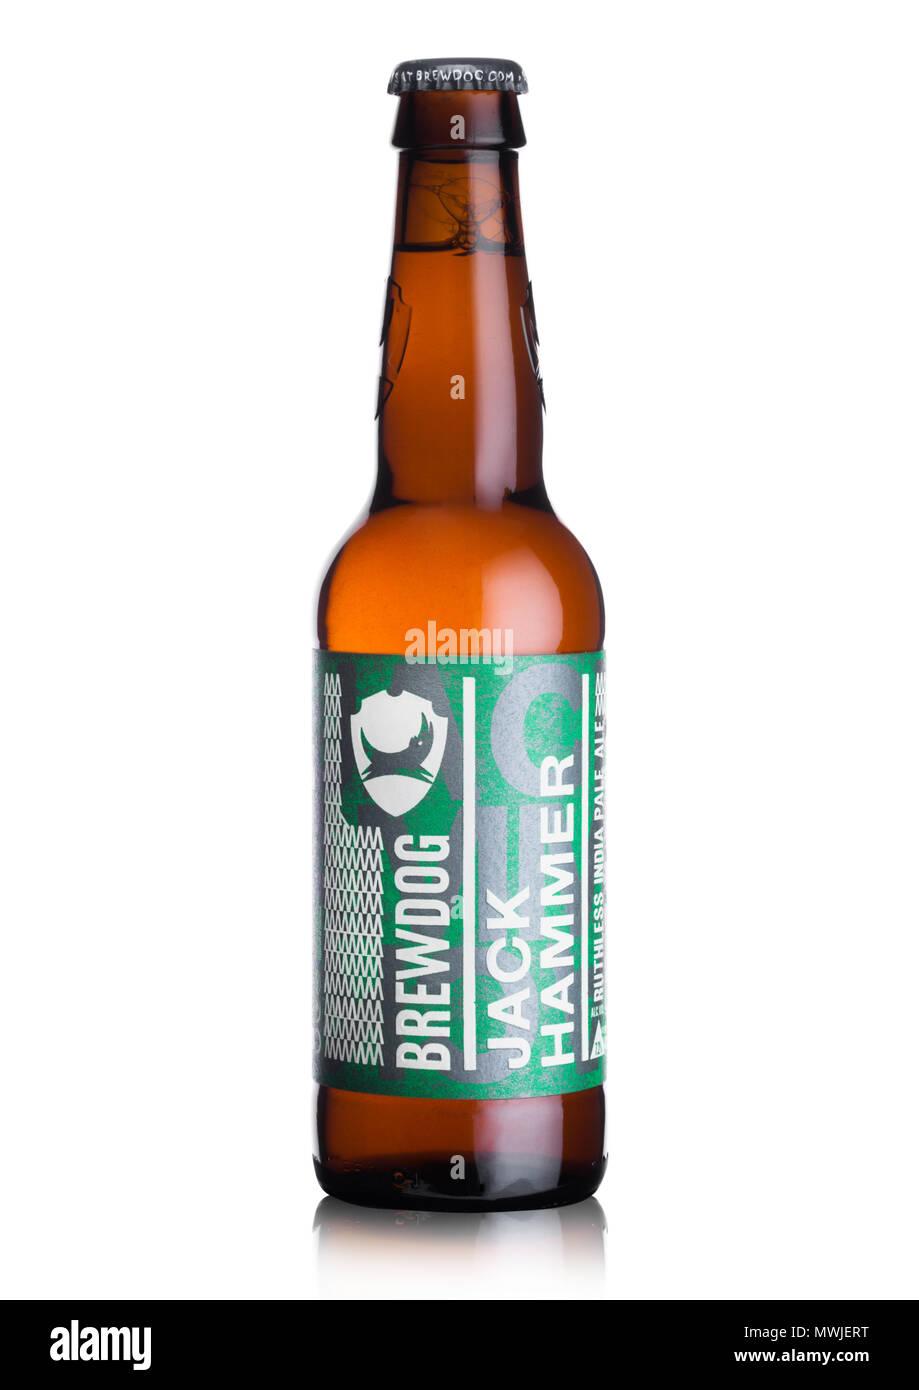 LONDON, UK - JUNE 01, 2018: Bottle of Jack Hammer indian pale ale beer, from the Brewdog brewery on white background. Stock Photo